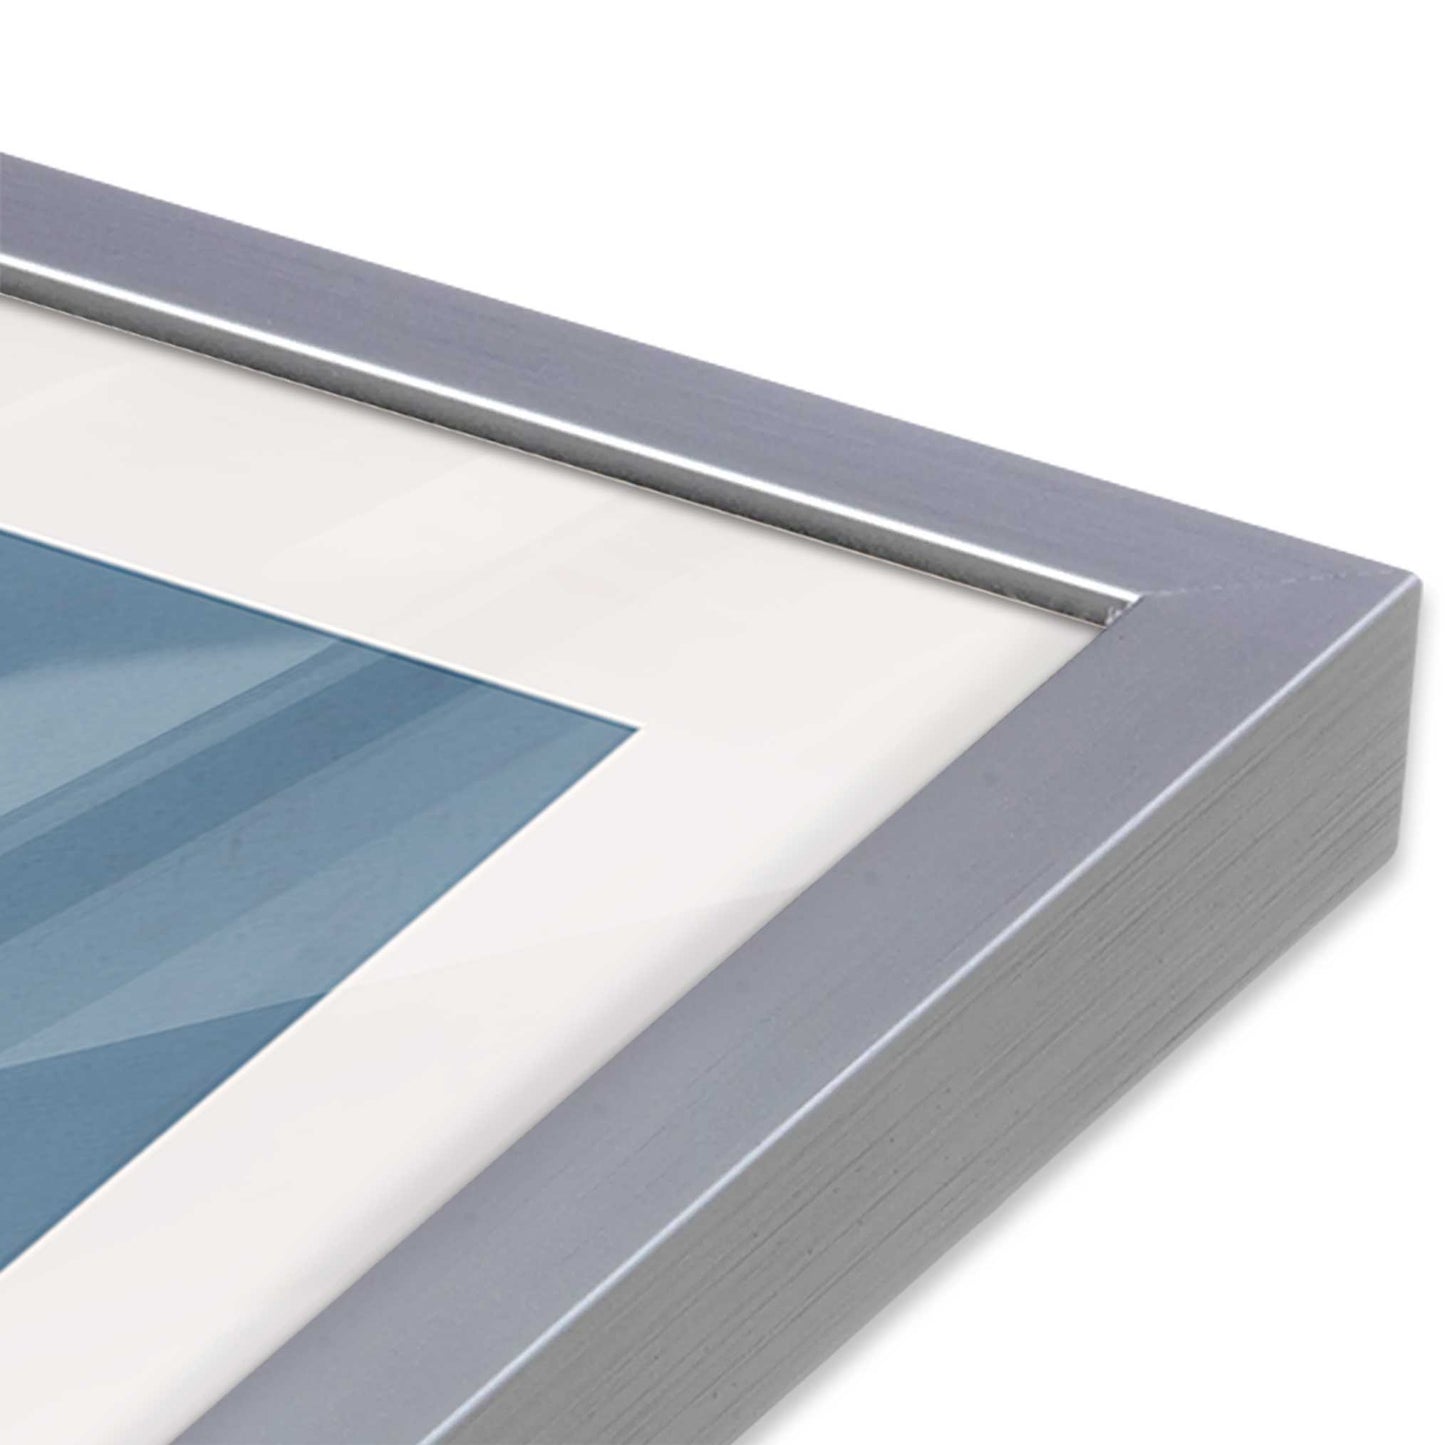 [Color:Polished Chrome], Picture of art in a Polished Chrome frame of the corner #2